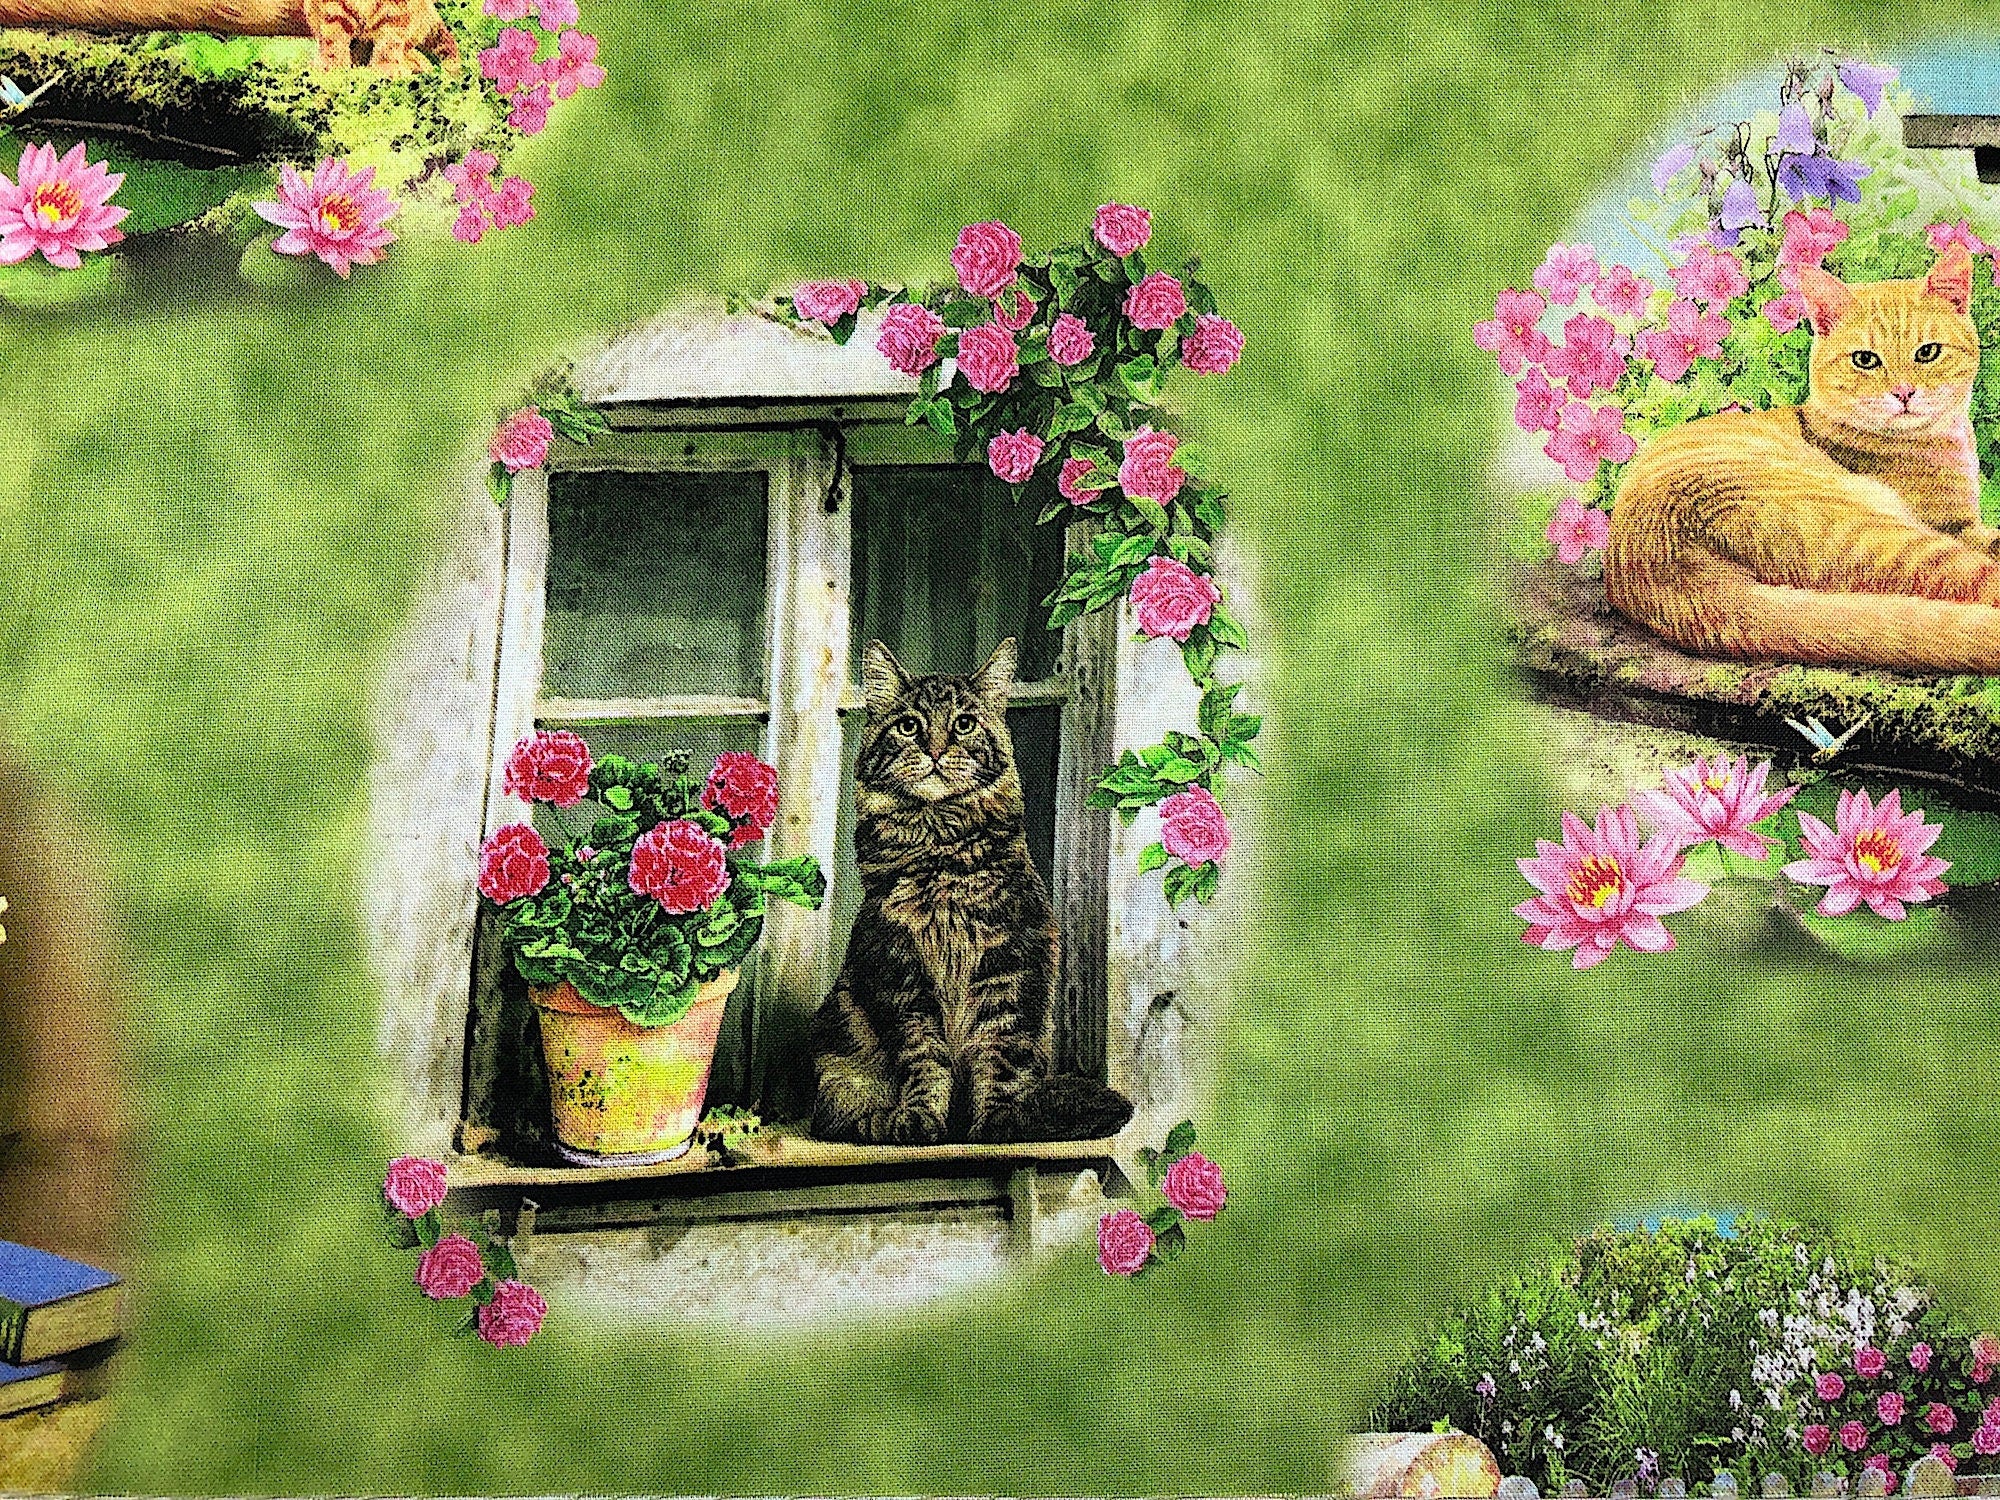 Close up of a cat sitting in a window frame beside a pot of geraniums.